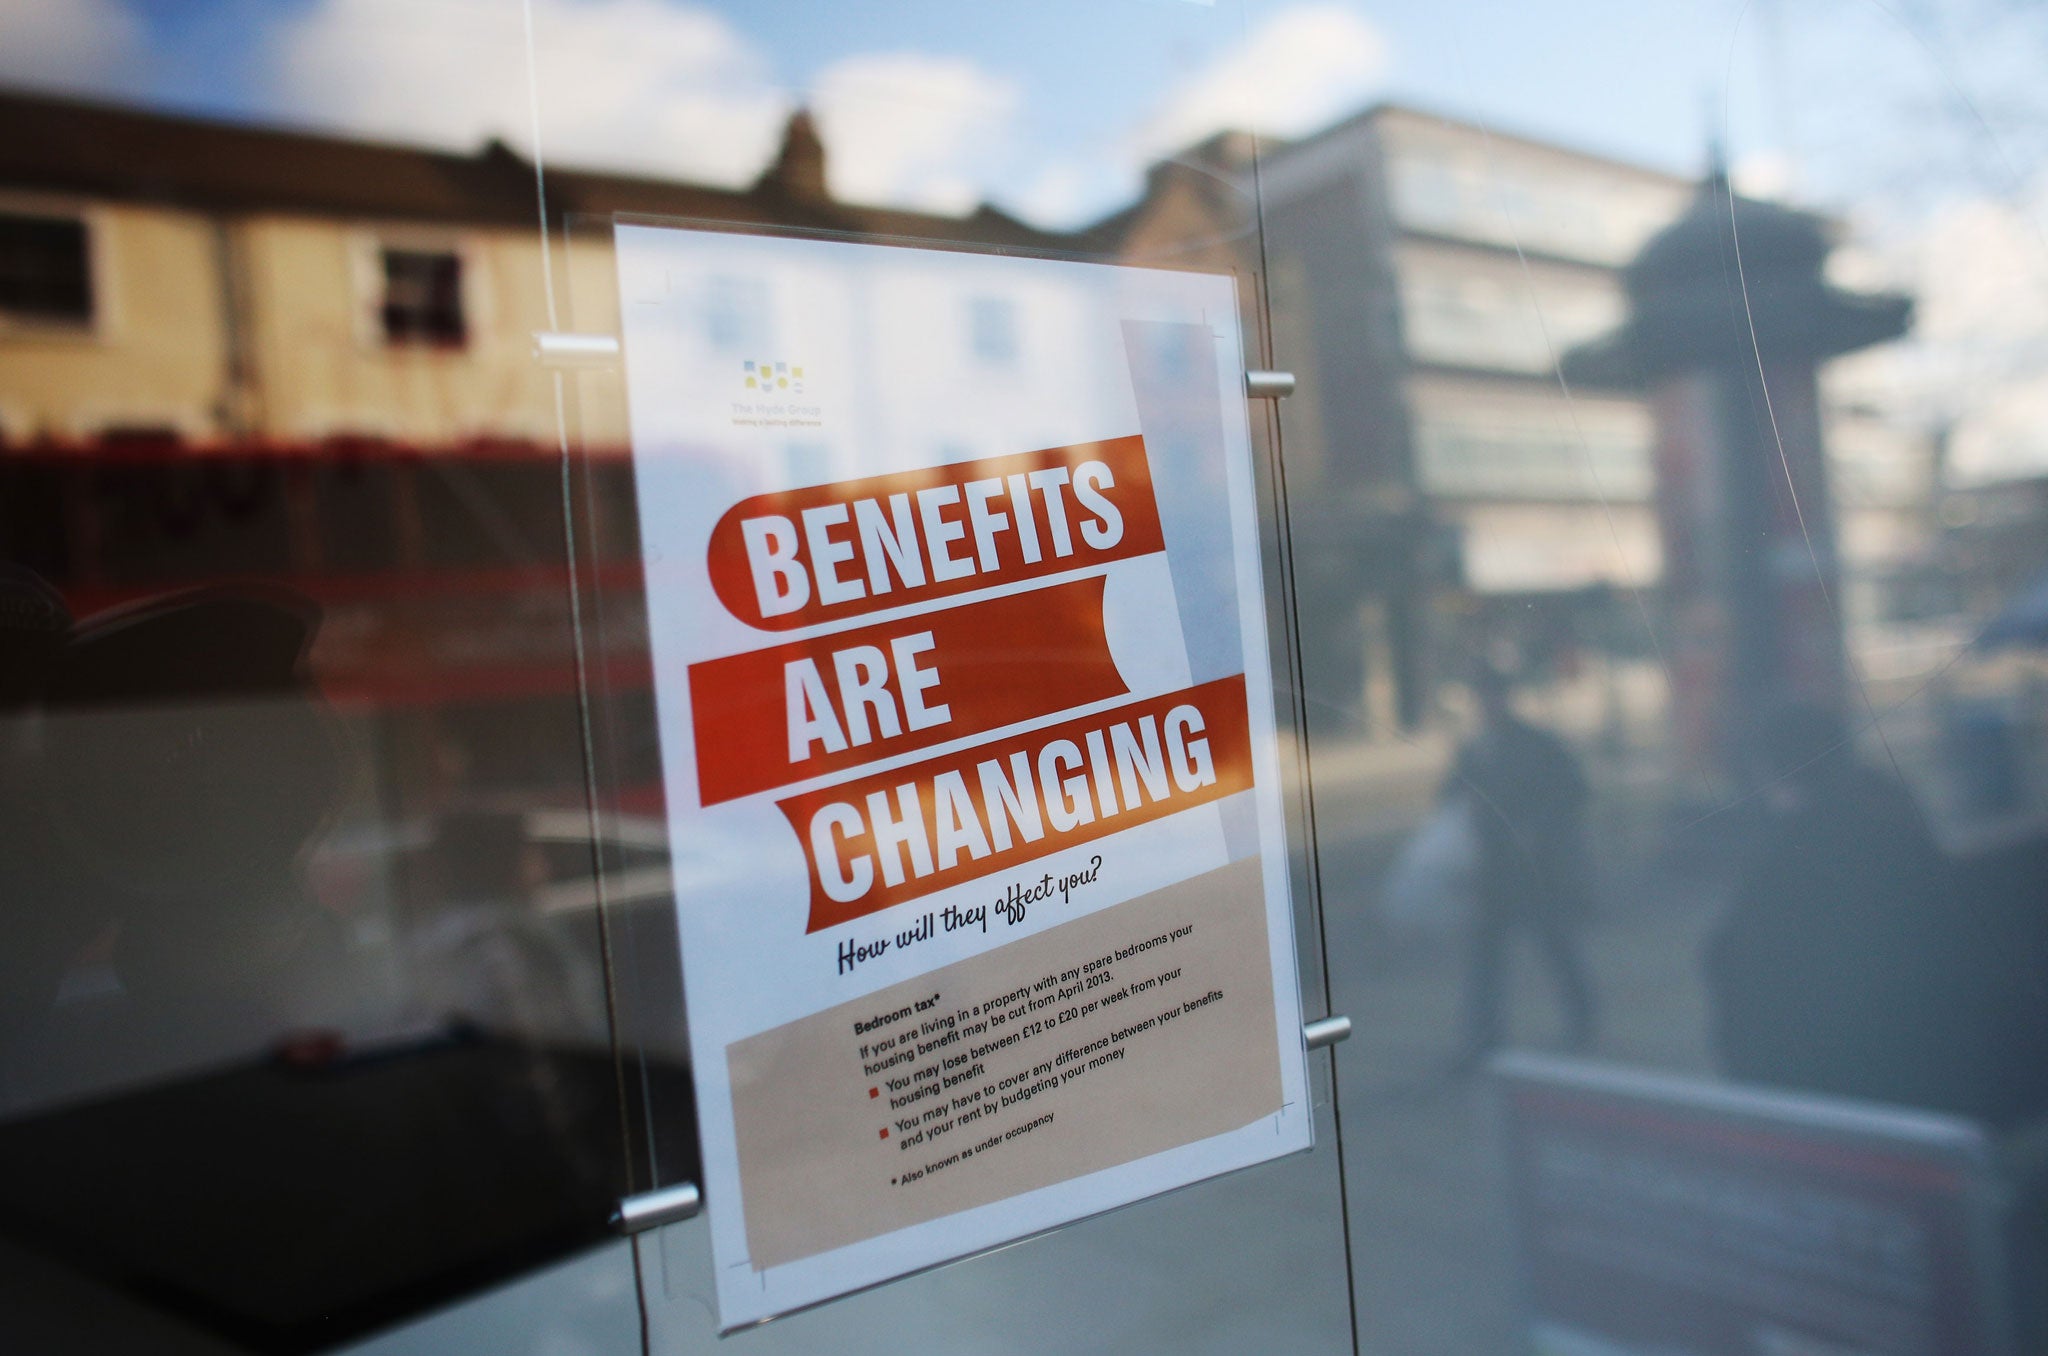 A sign informs members of the public on changes to Benefits on Lewisham high street on December 5, 2012 in London, England.